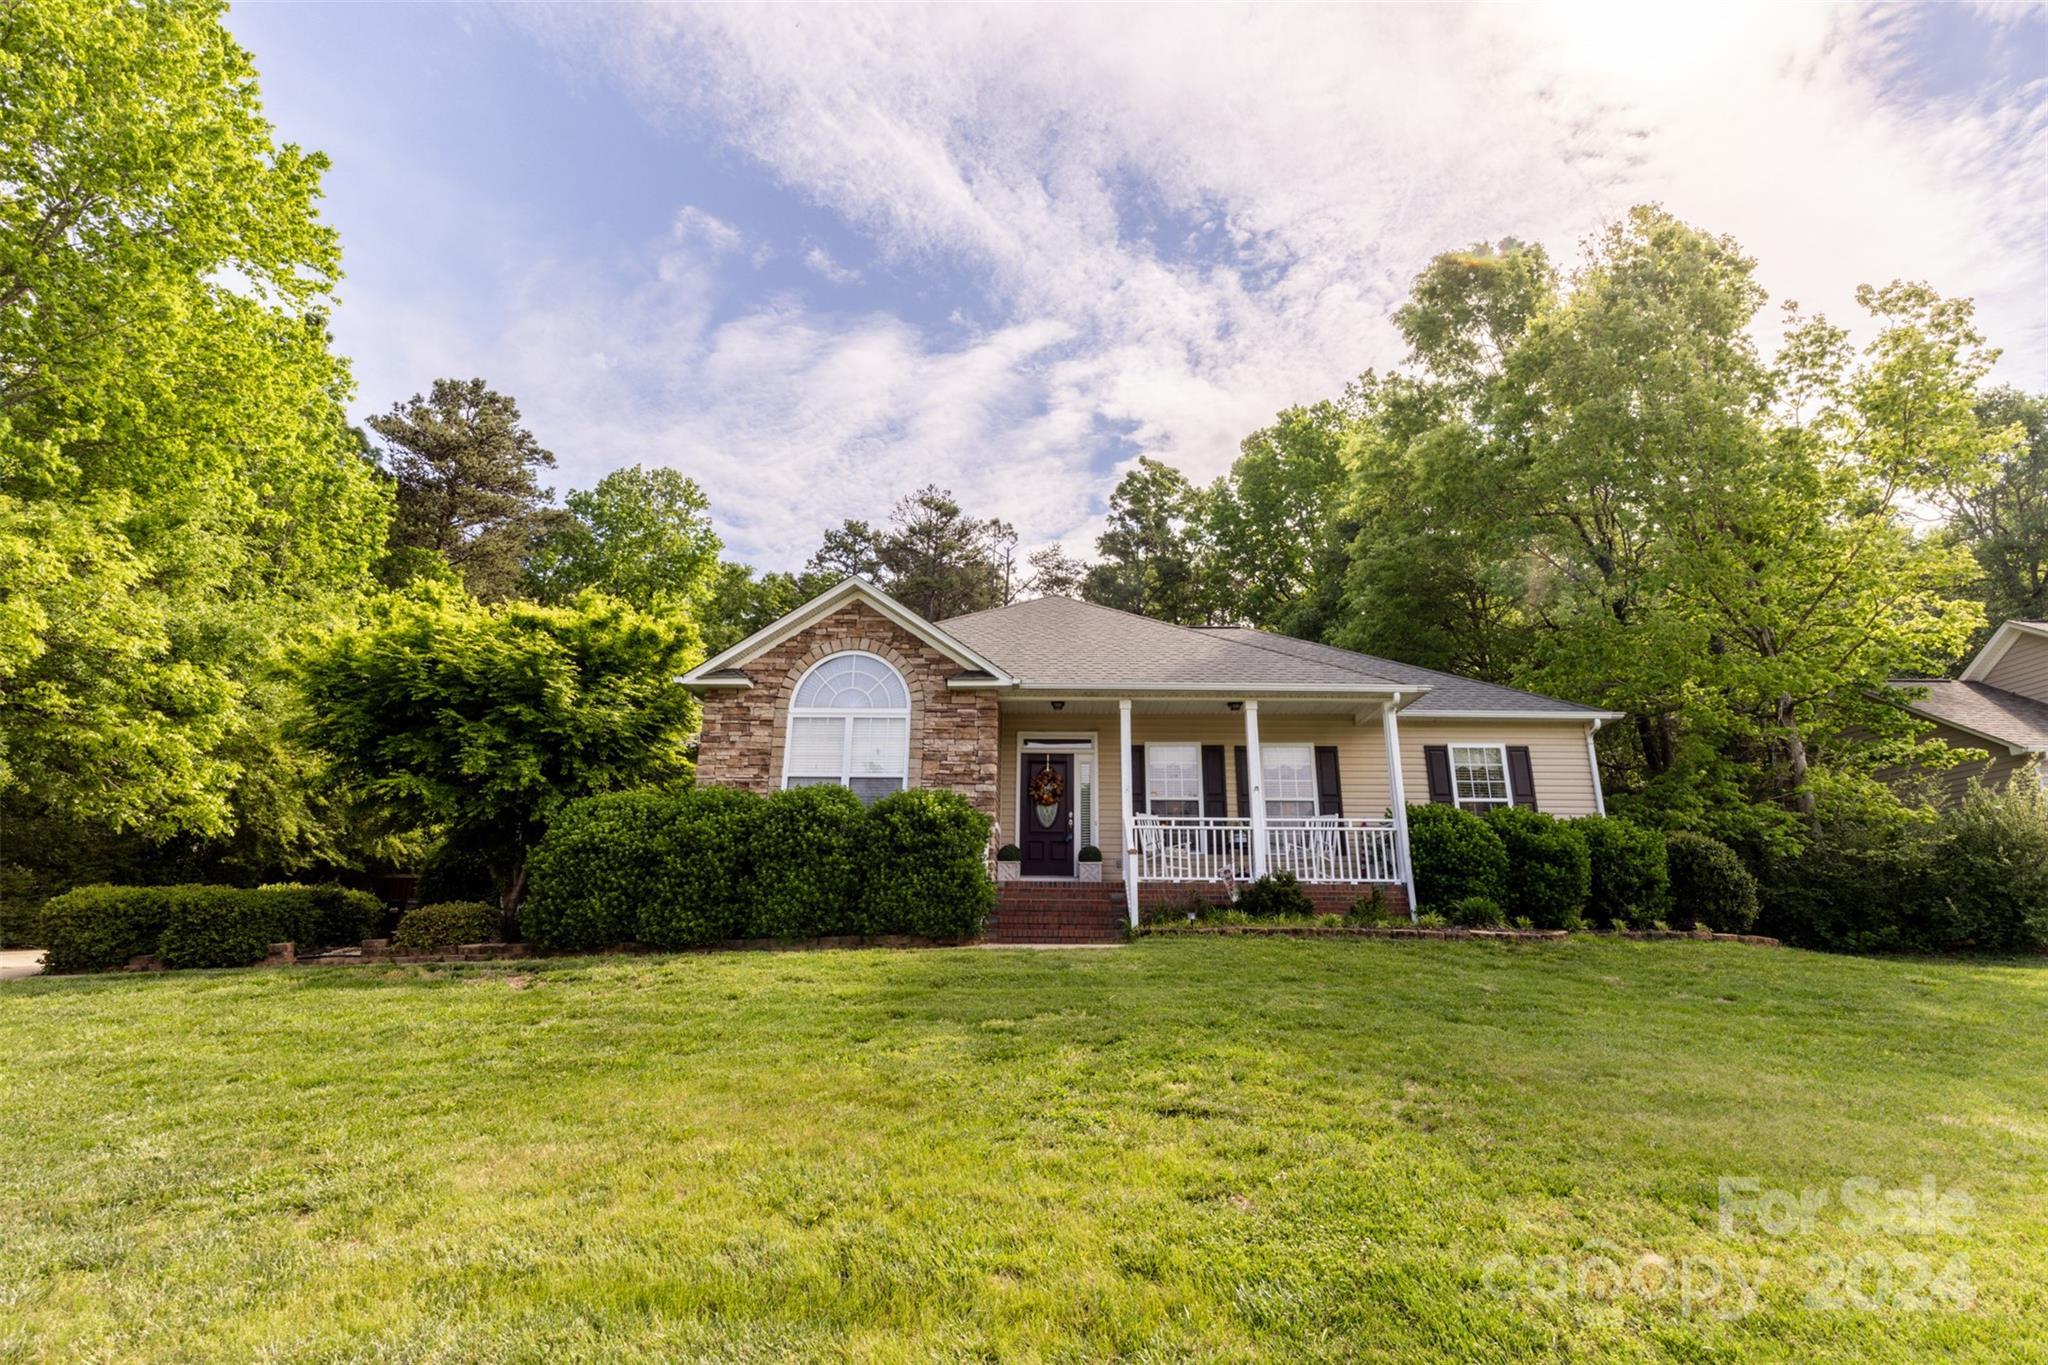 Photo one of 3103 Richards Way Dr Rock Hill SC 29732 | MLS 4131067